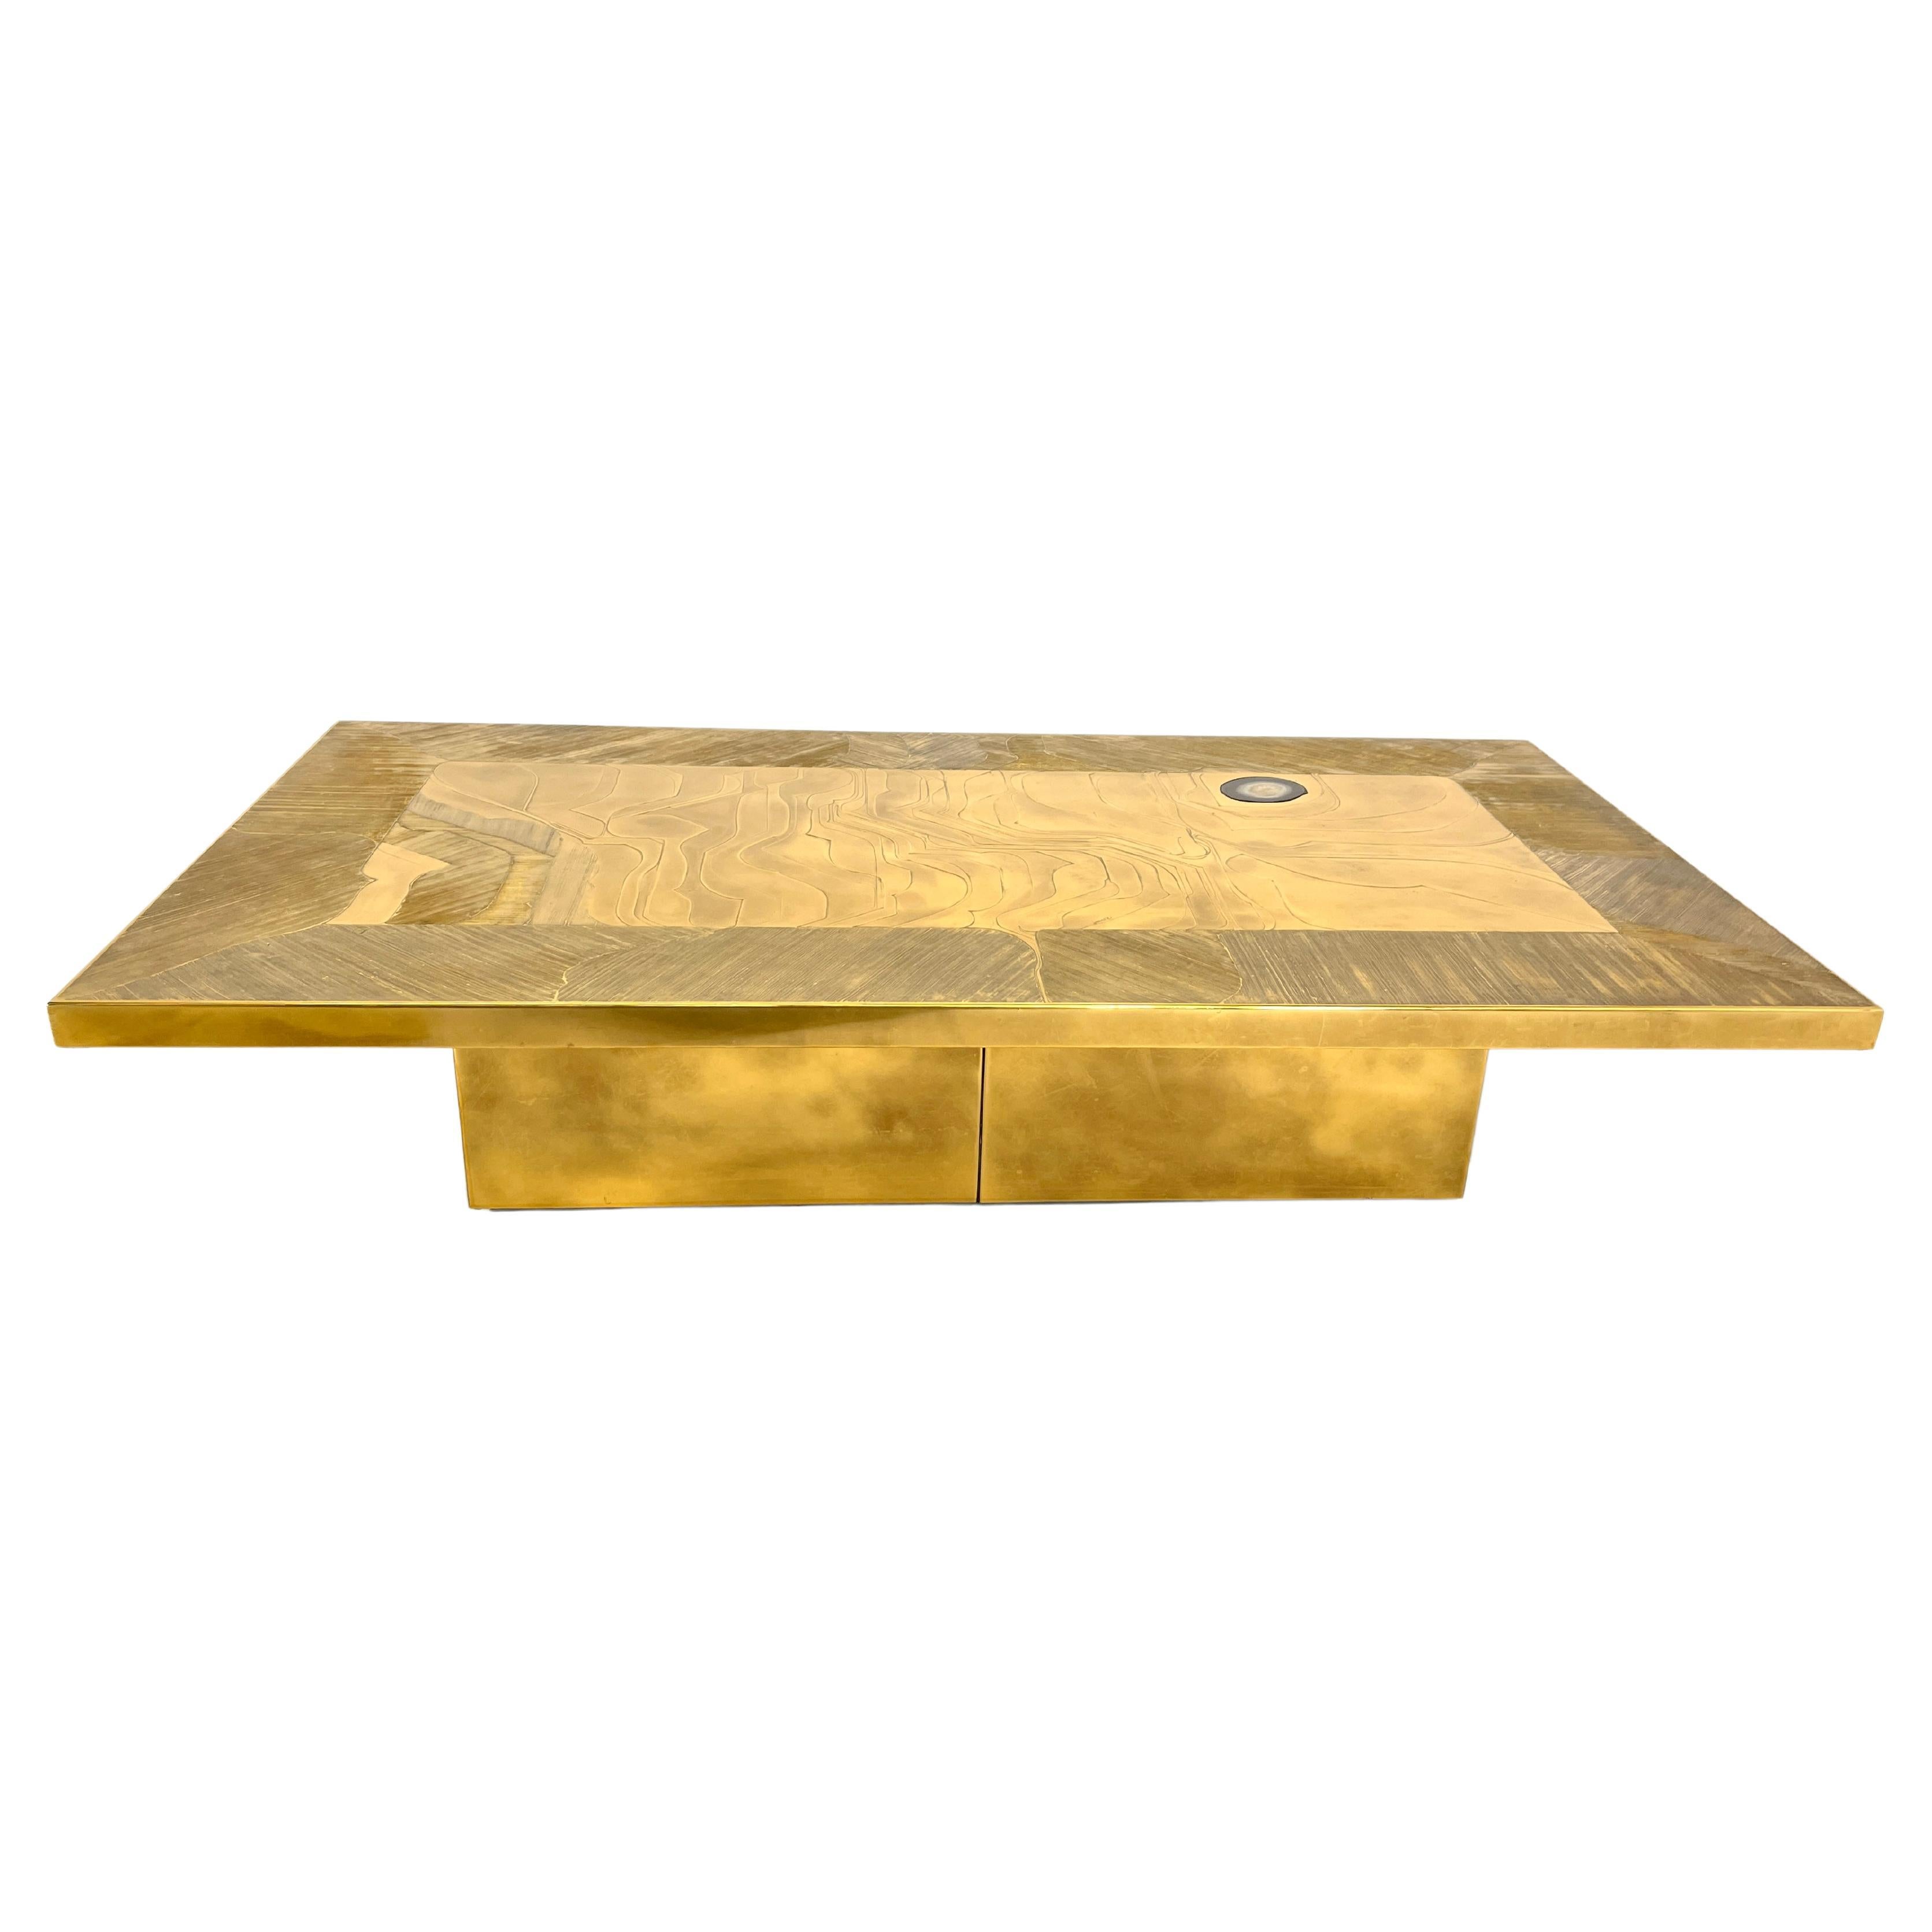 Jenatzi Etched Brass Coffee Table Inlaid 1 Agates, circa 1970 For Sale